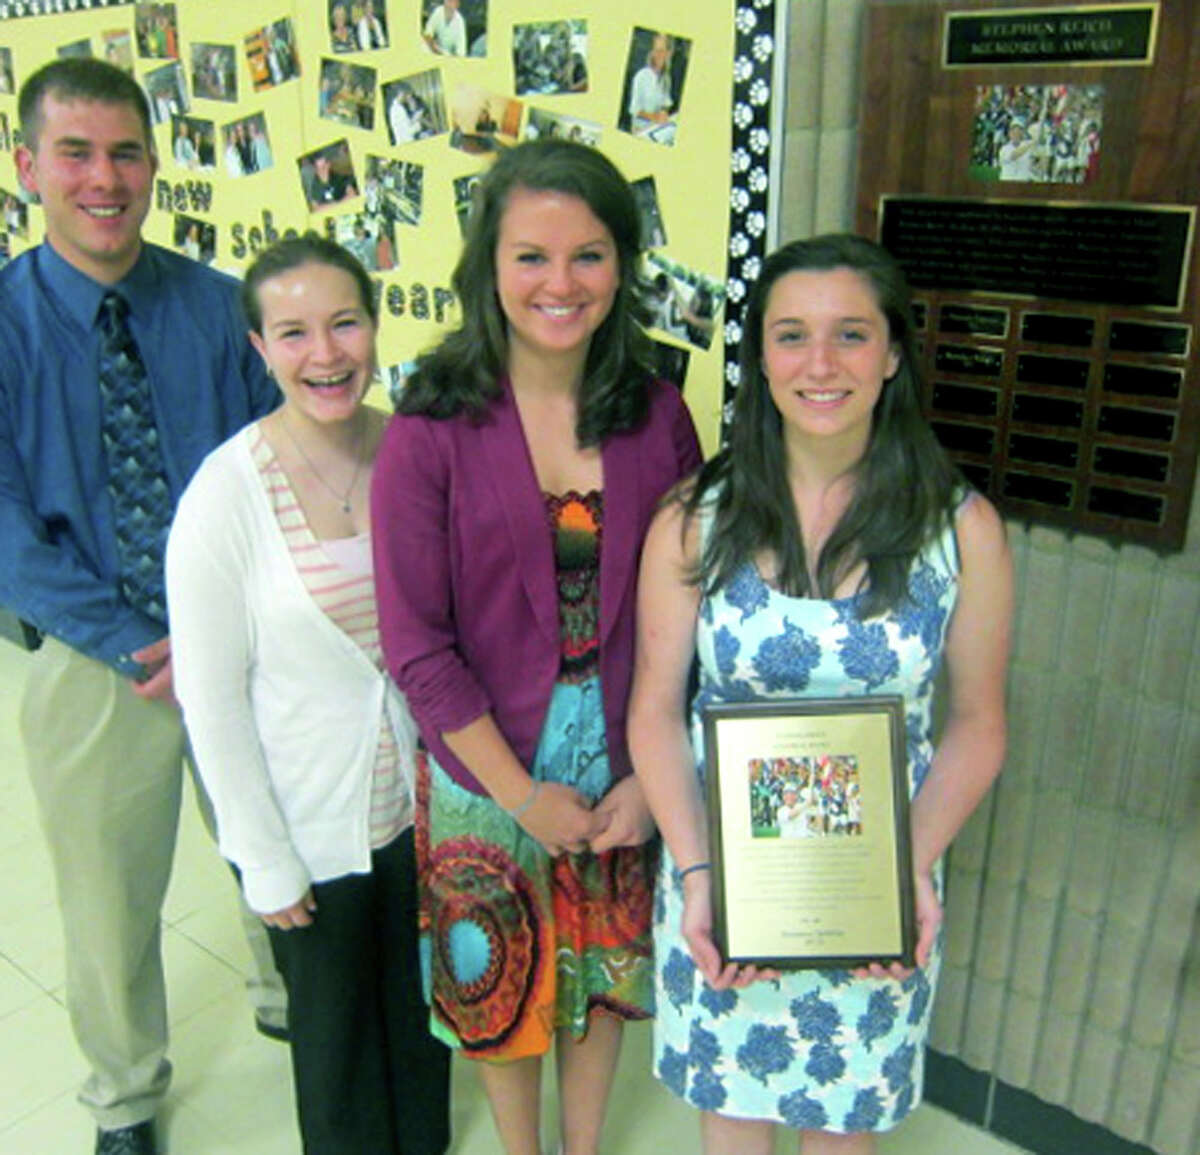 Kate DeWitte proudly holds the Stepehn Reich Memorial Award, given annually for eight years to a Shepaug Valley High School senior. Joining her following May 23's ceremony at the school are past recipients Ethan LaBella, Megan Woodruff and Alexandra Moravsky. May 23, 2013